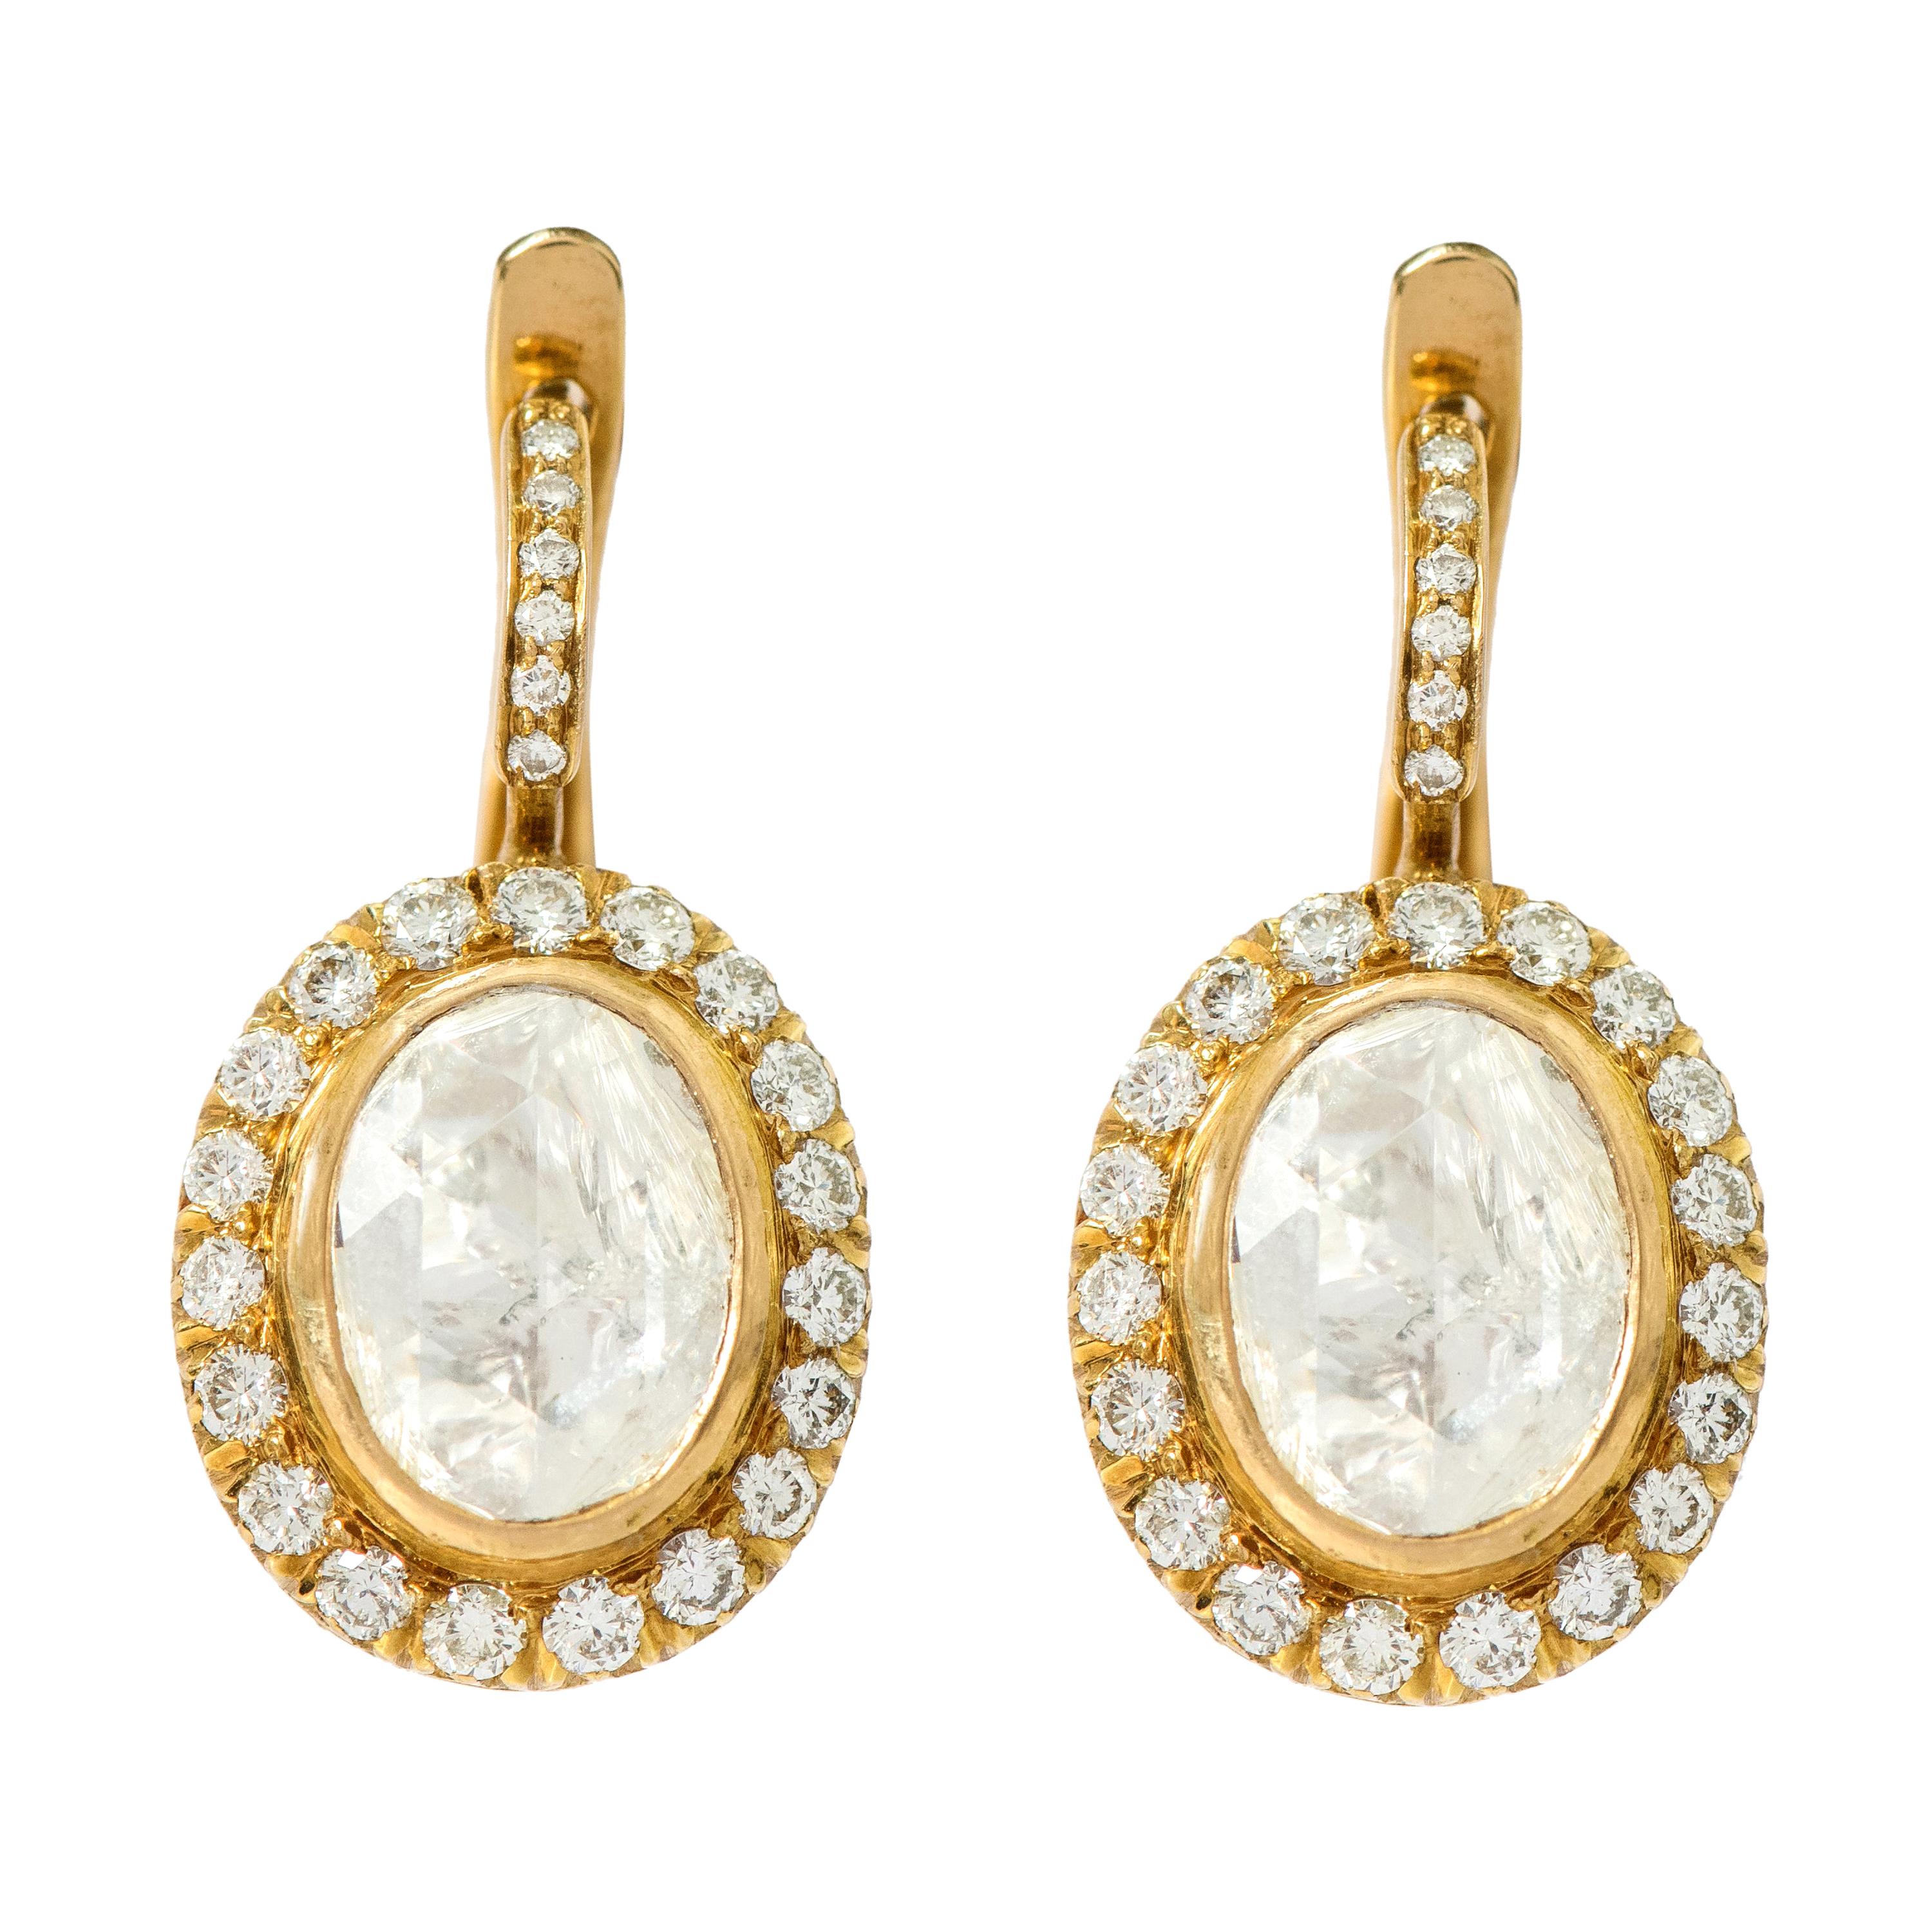 18 Karat Gold 4.03 Carats Solitaire Diamond Drop Earrings in Victorian Style For Sale